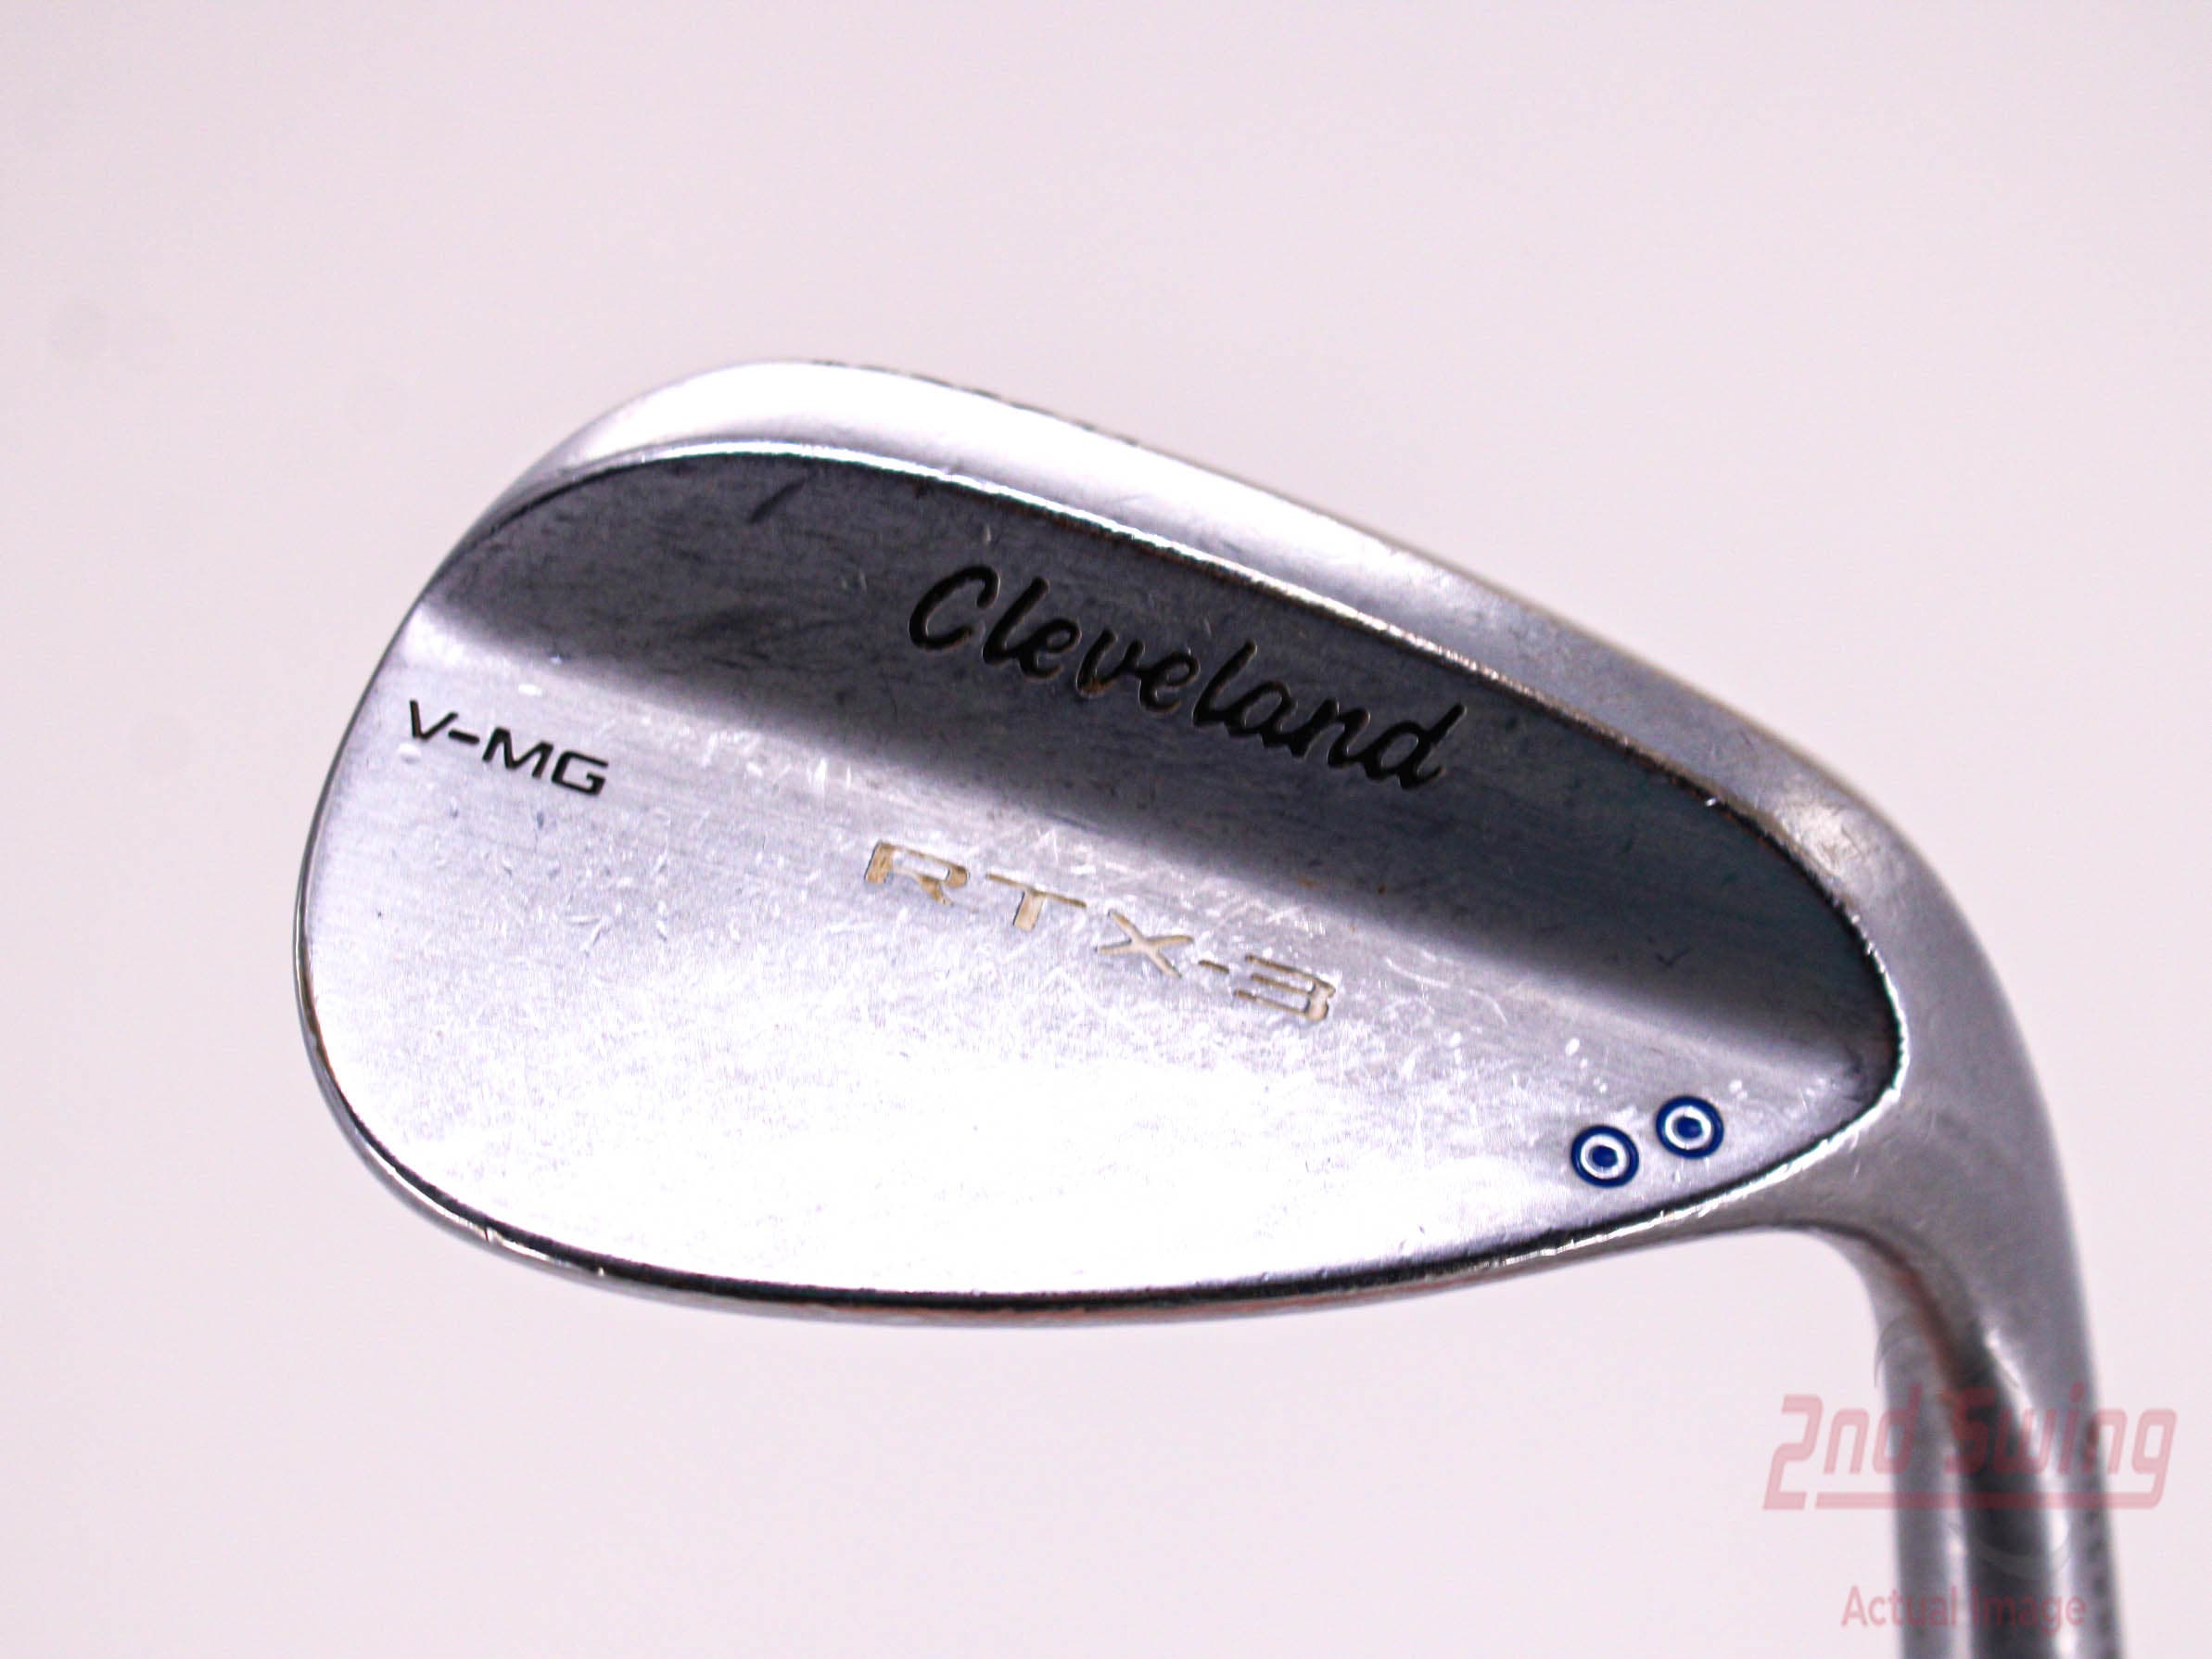 Cleveland RTX-3 Tour Satin Wedge | 2nd Swing Golf